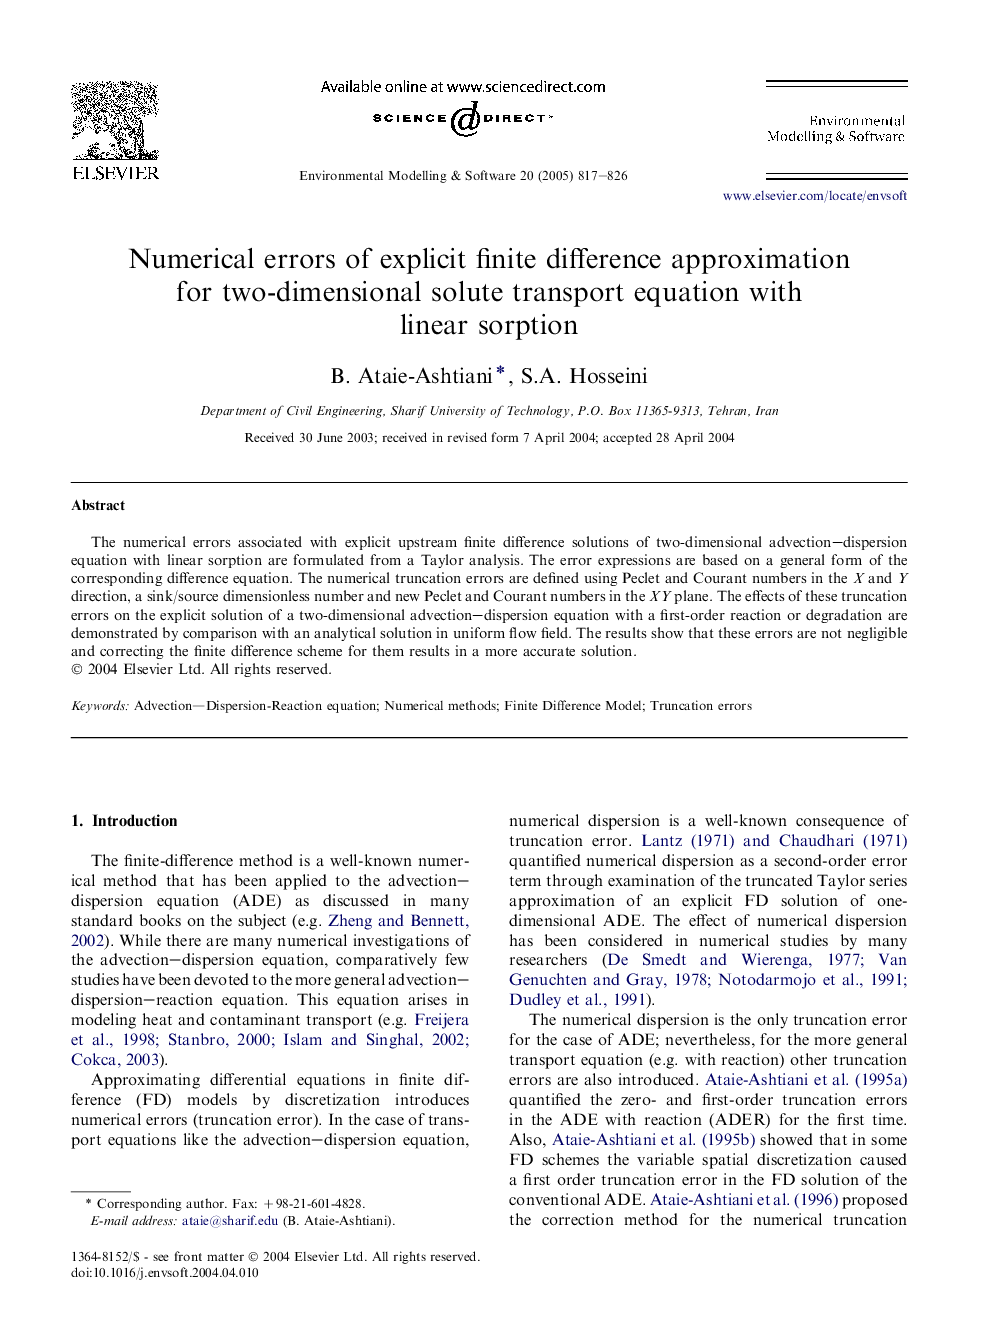 Numerical errors of explicit finite difference approximation for two-dimensional solute transport equation with linear sorption